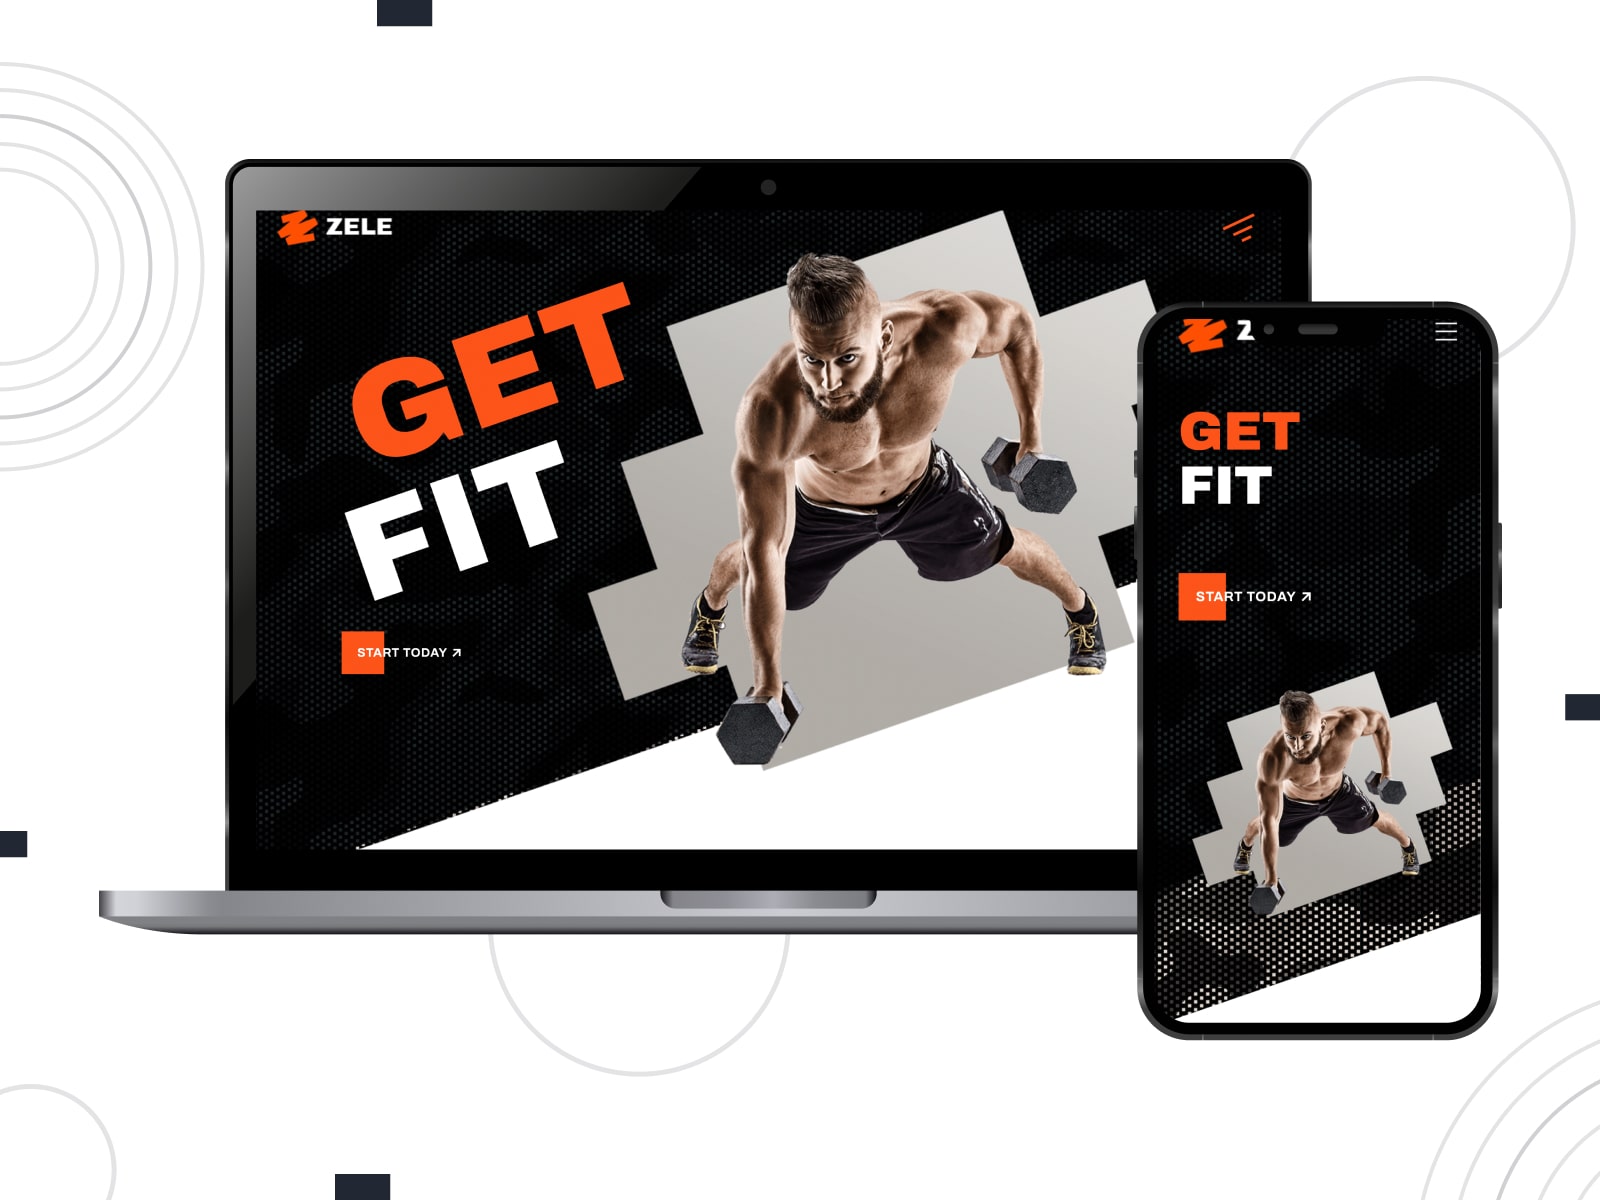 Collage of the Zele personal trainer WordPress themes demo page on mobile and desktop screens.